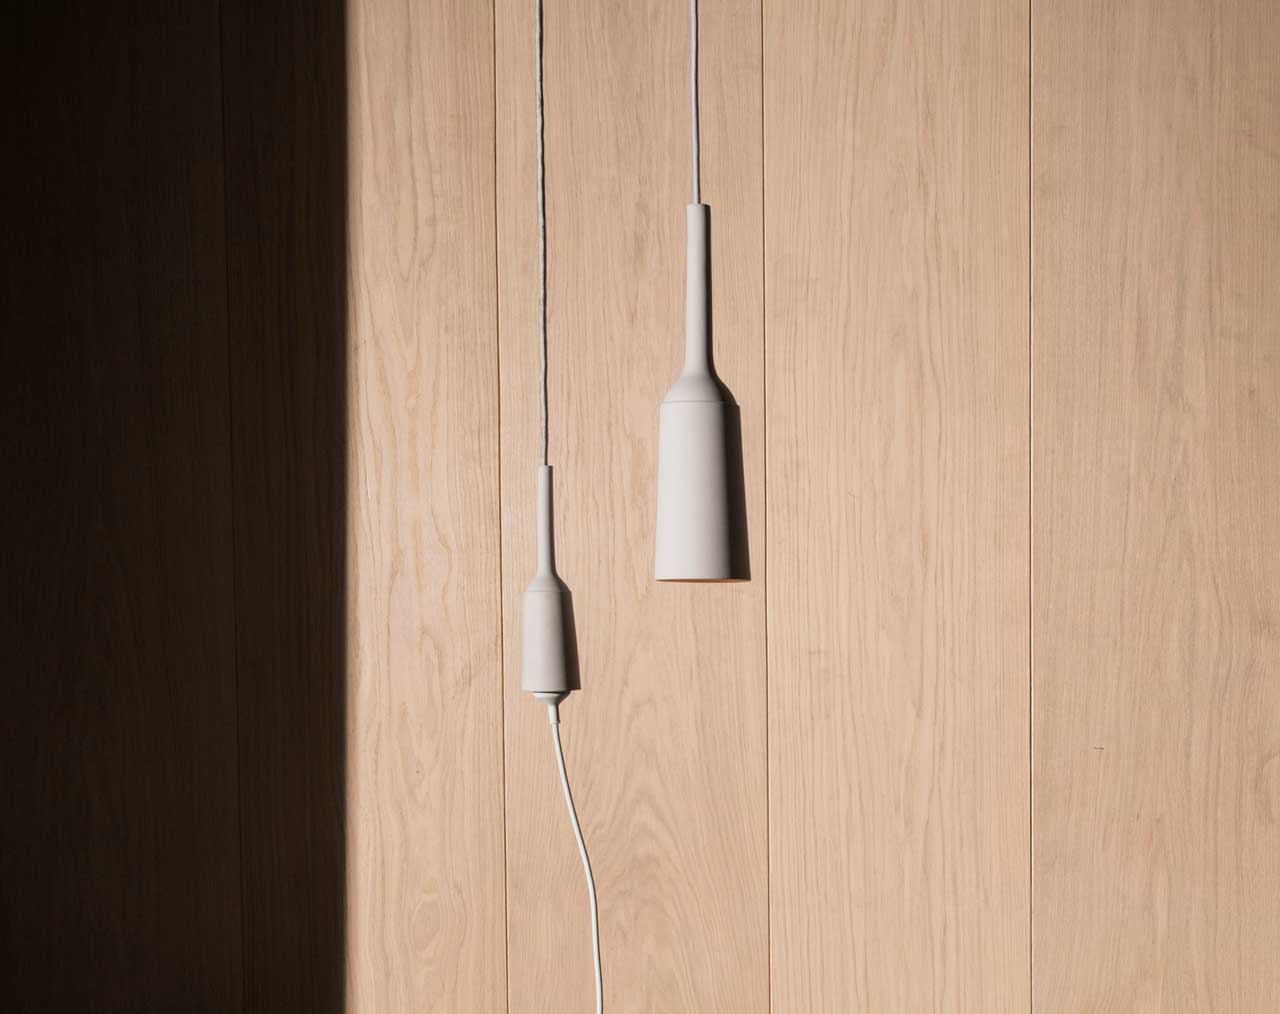 The Douwes Pendant&Socket Proves Sockets Don’t Have to Be Hidden